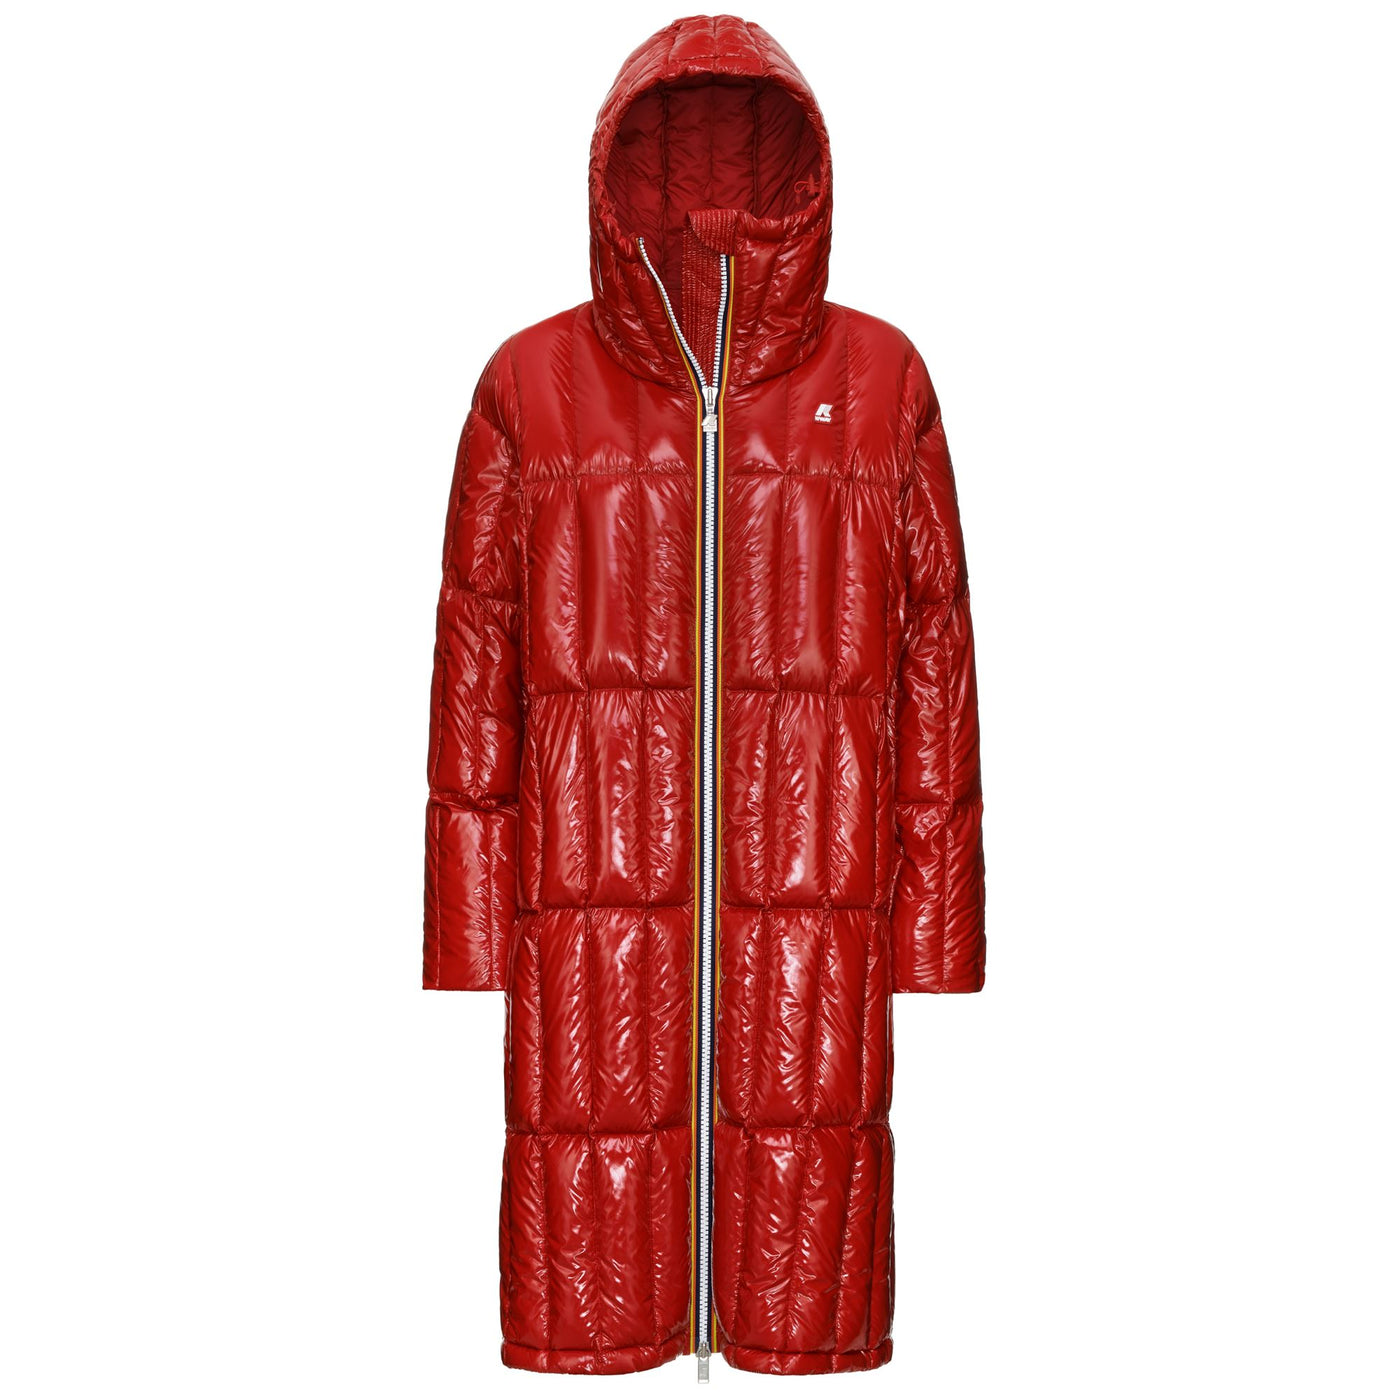 Jackets Woman SIDOINE WARM SHINY QUILTED Long RED VERMILION Photo (jpg Rgb)			